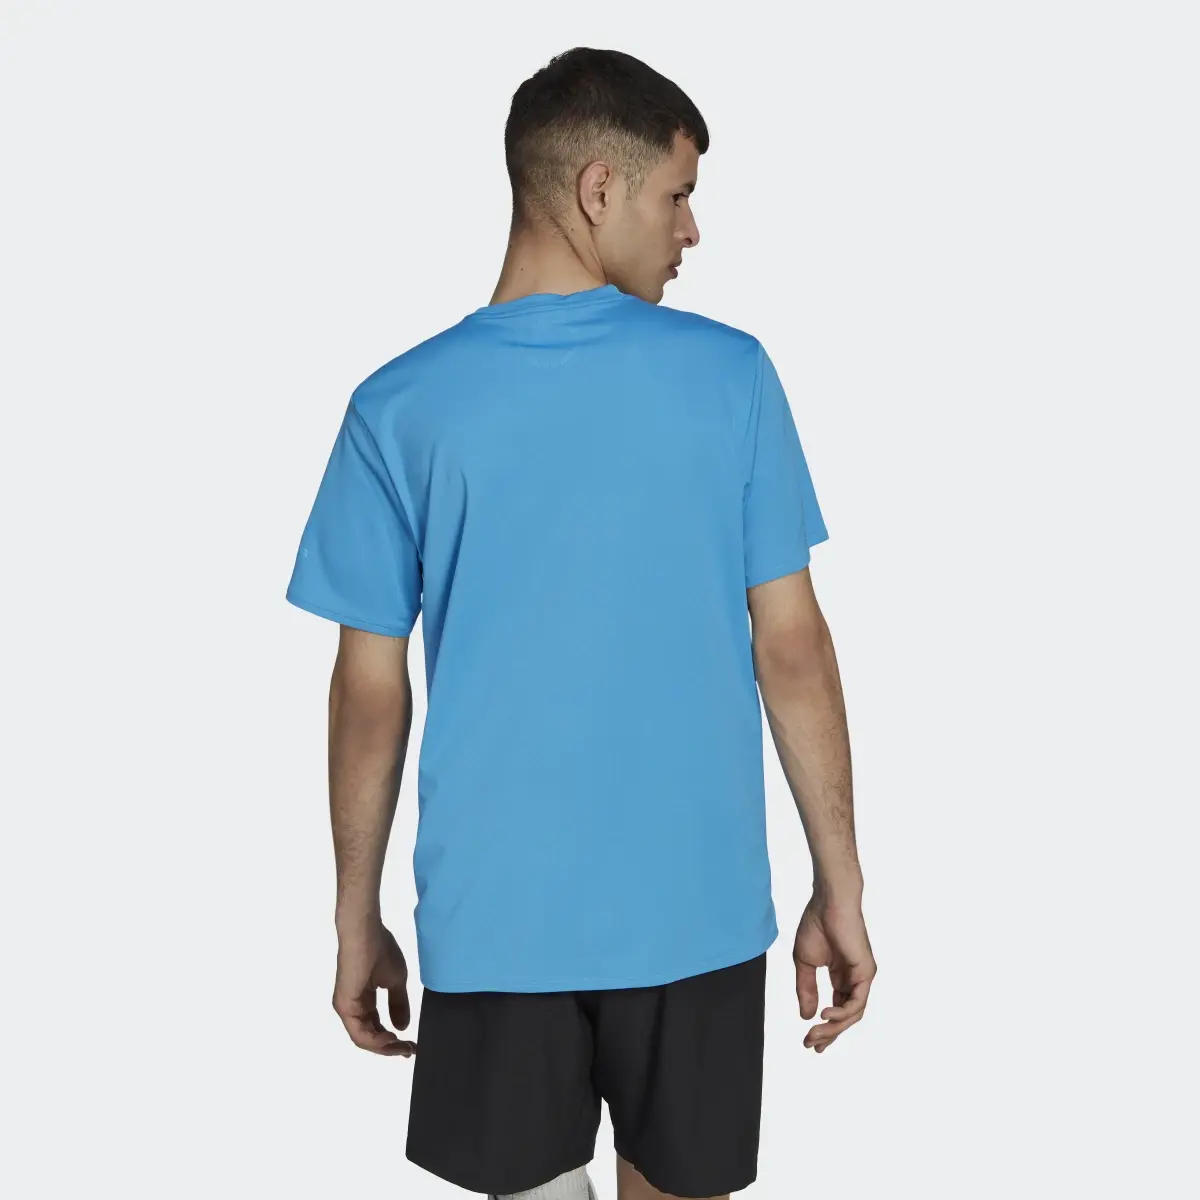 Adidas Made to Be Remade Running Tee. 2